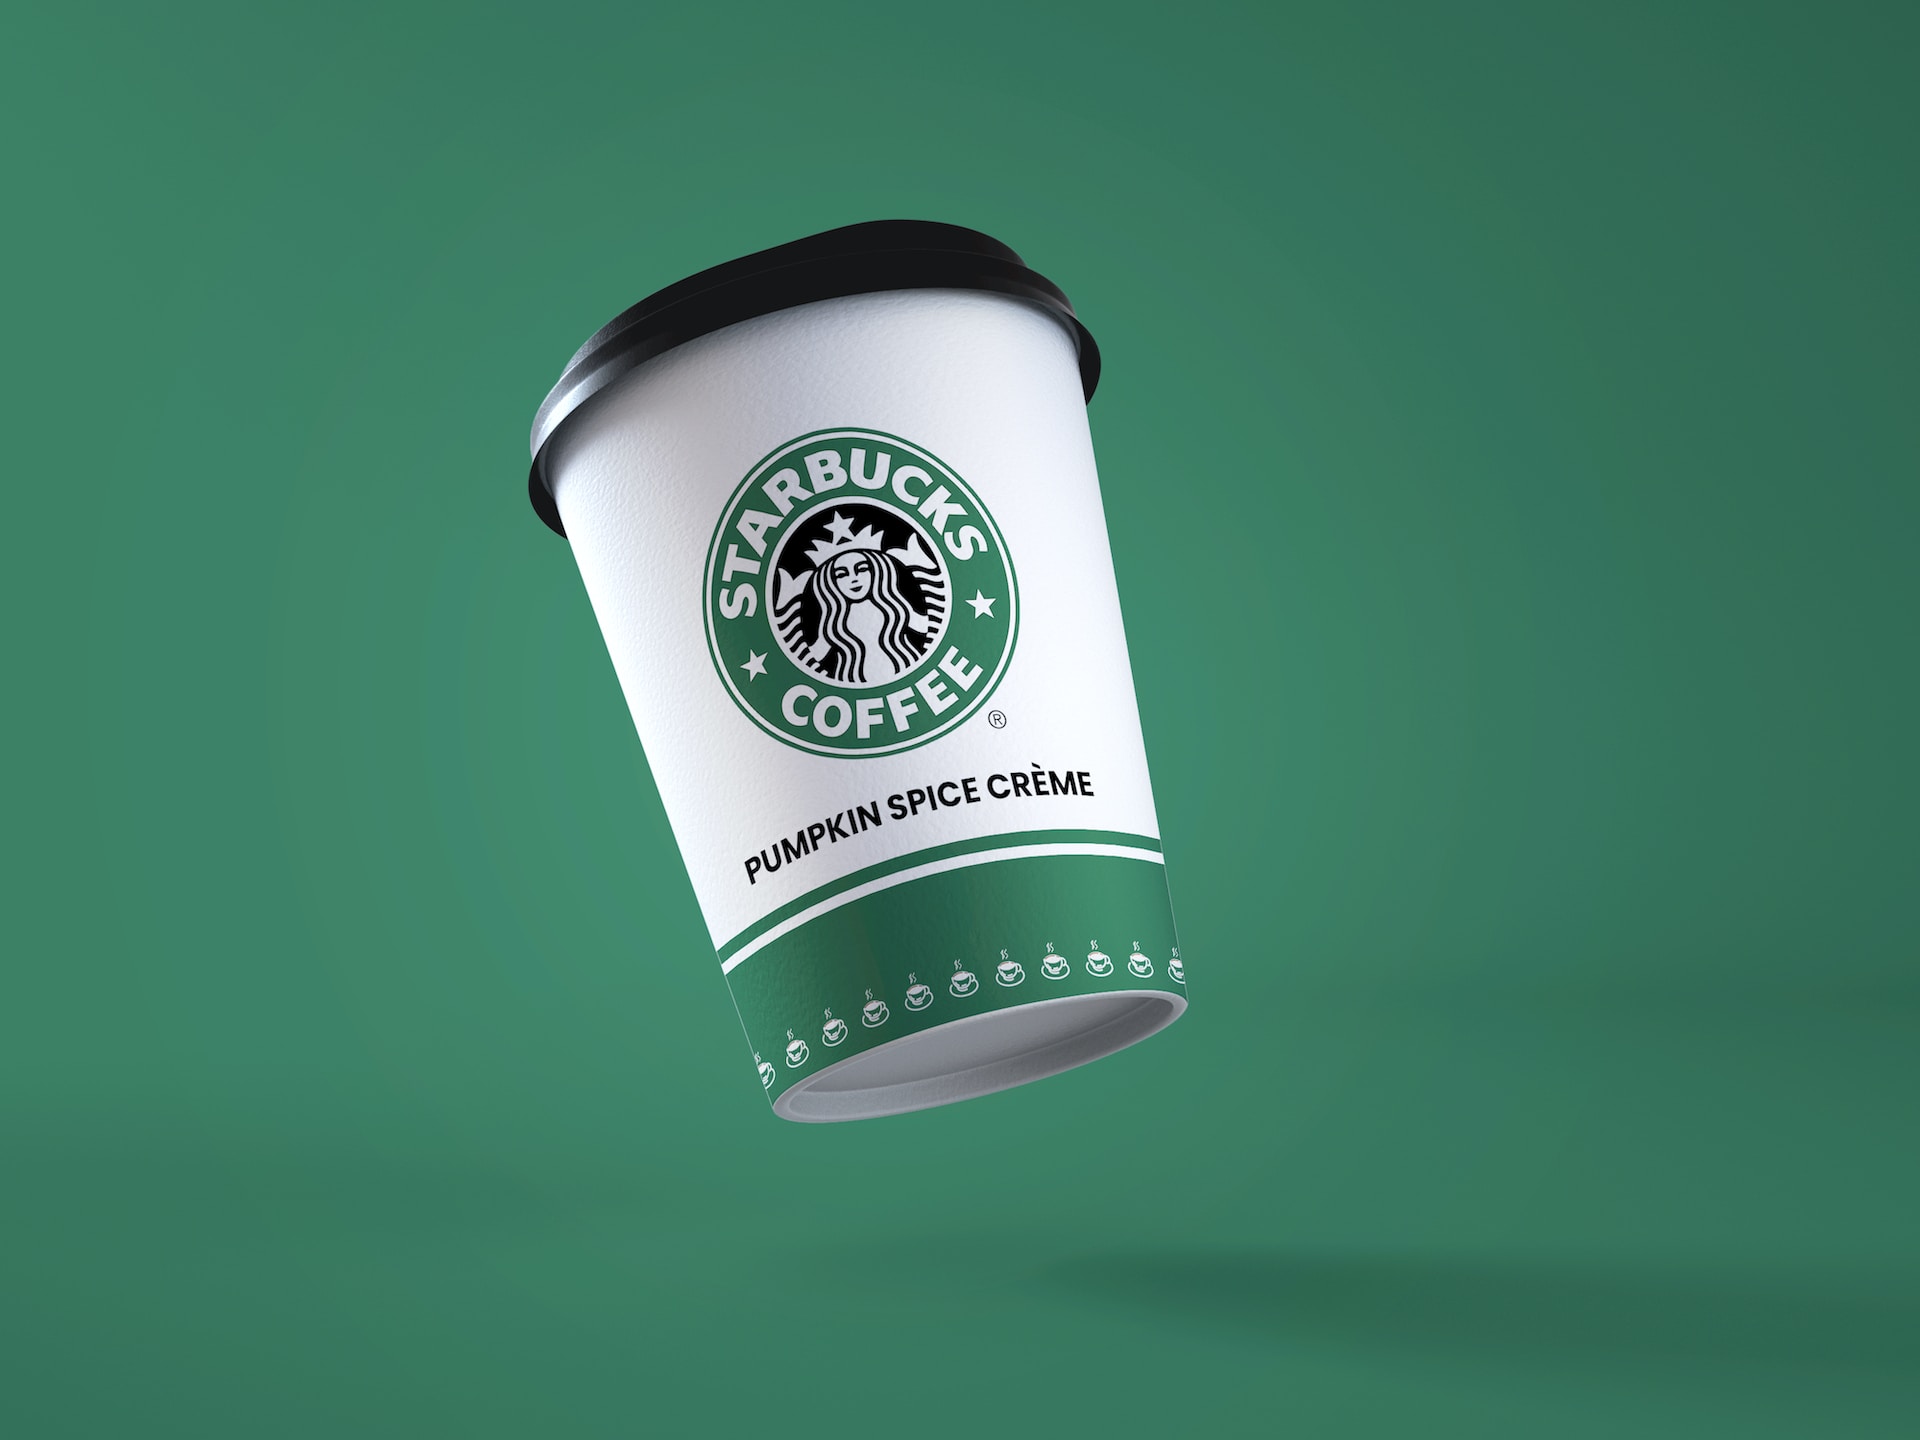 30 Starbucks Facts You Didn't Know About — Eat This Not That